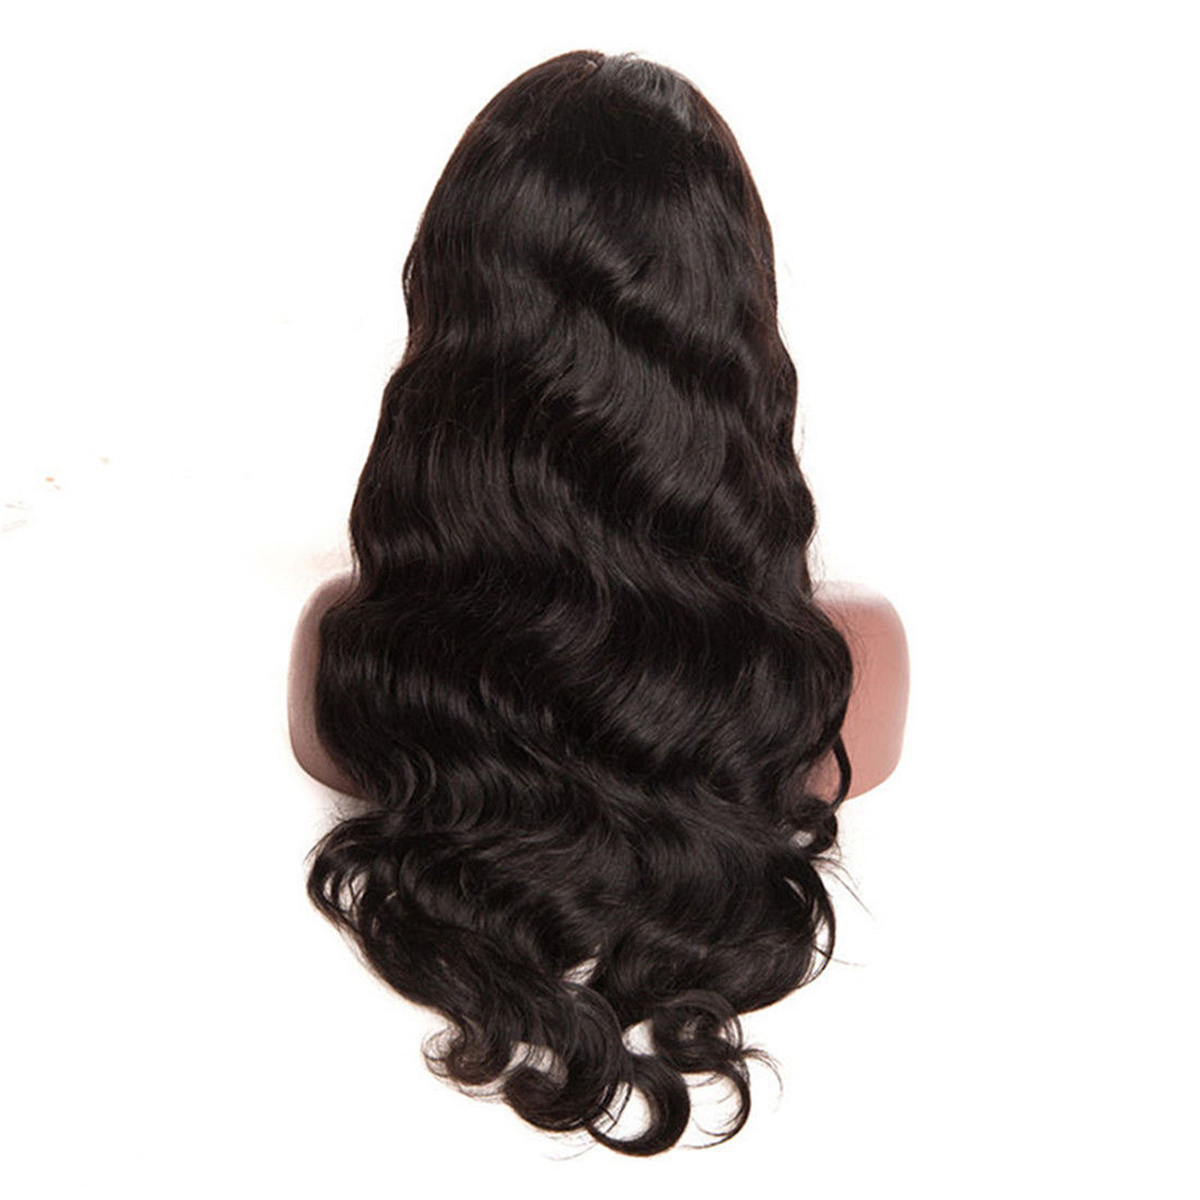 Glueless Lace Front Hair Wigs Wave Curly Wig Brazilian Simulated Women 24 inch